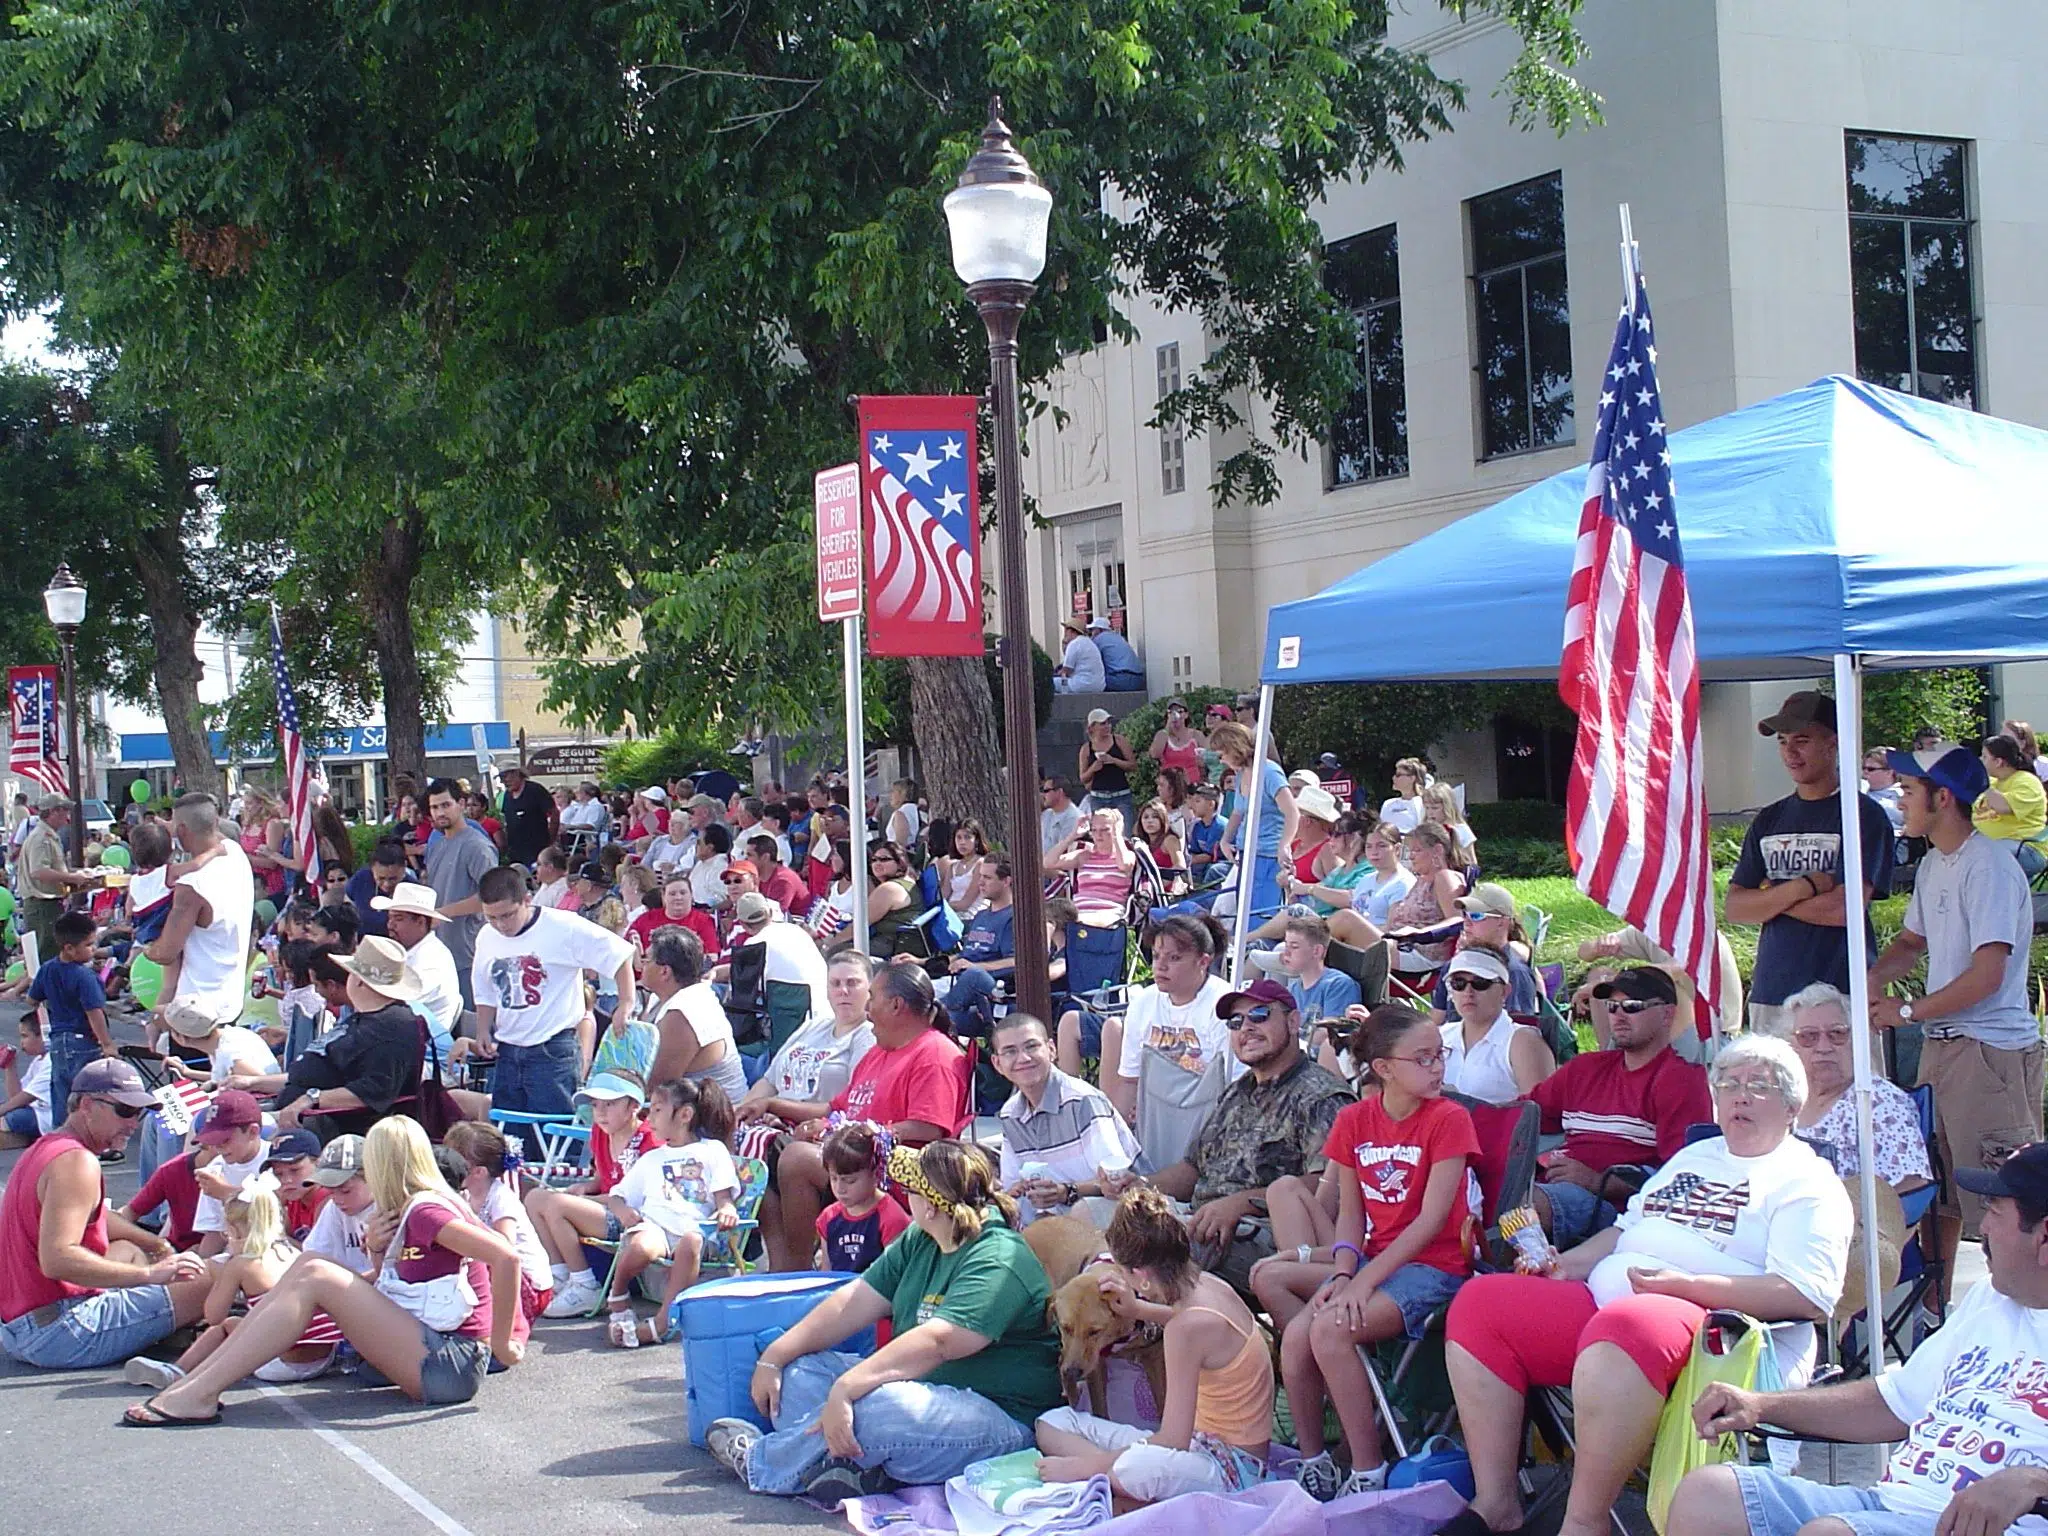 City, County & GRMC Officials Will lead the “Biggest SmallTown 4th of